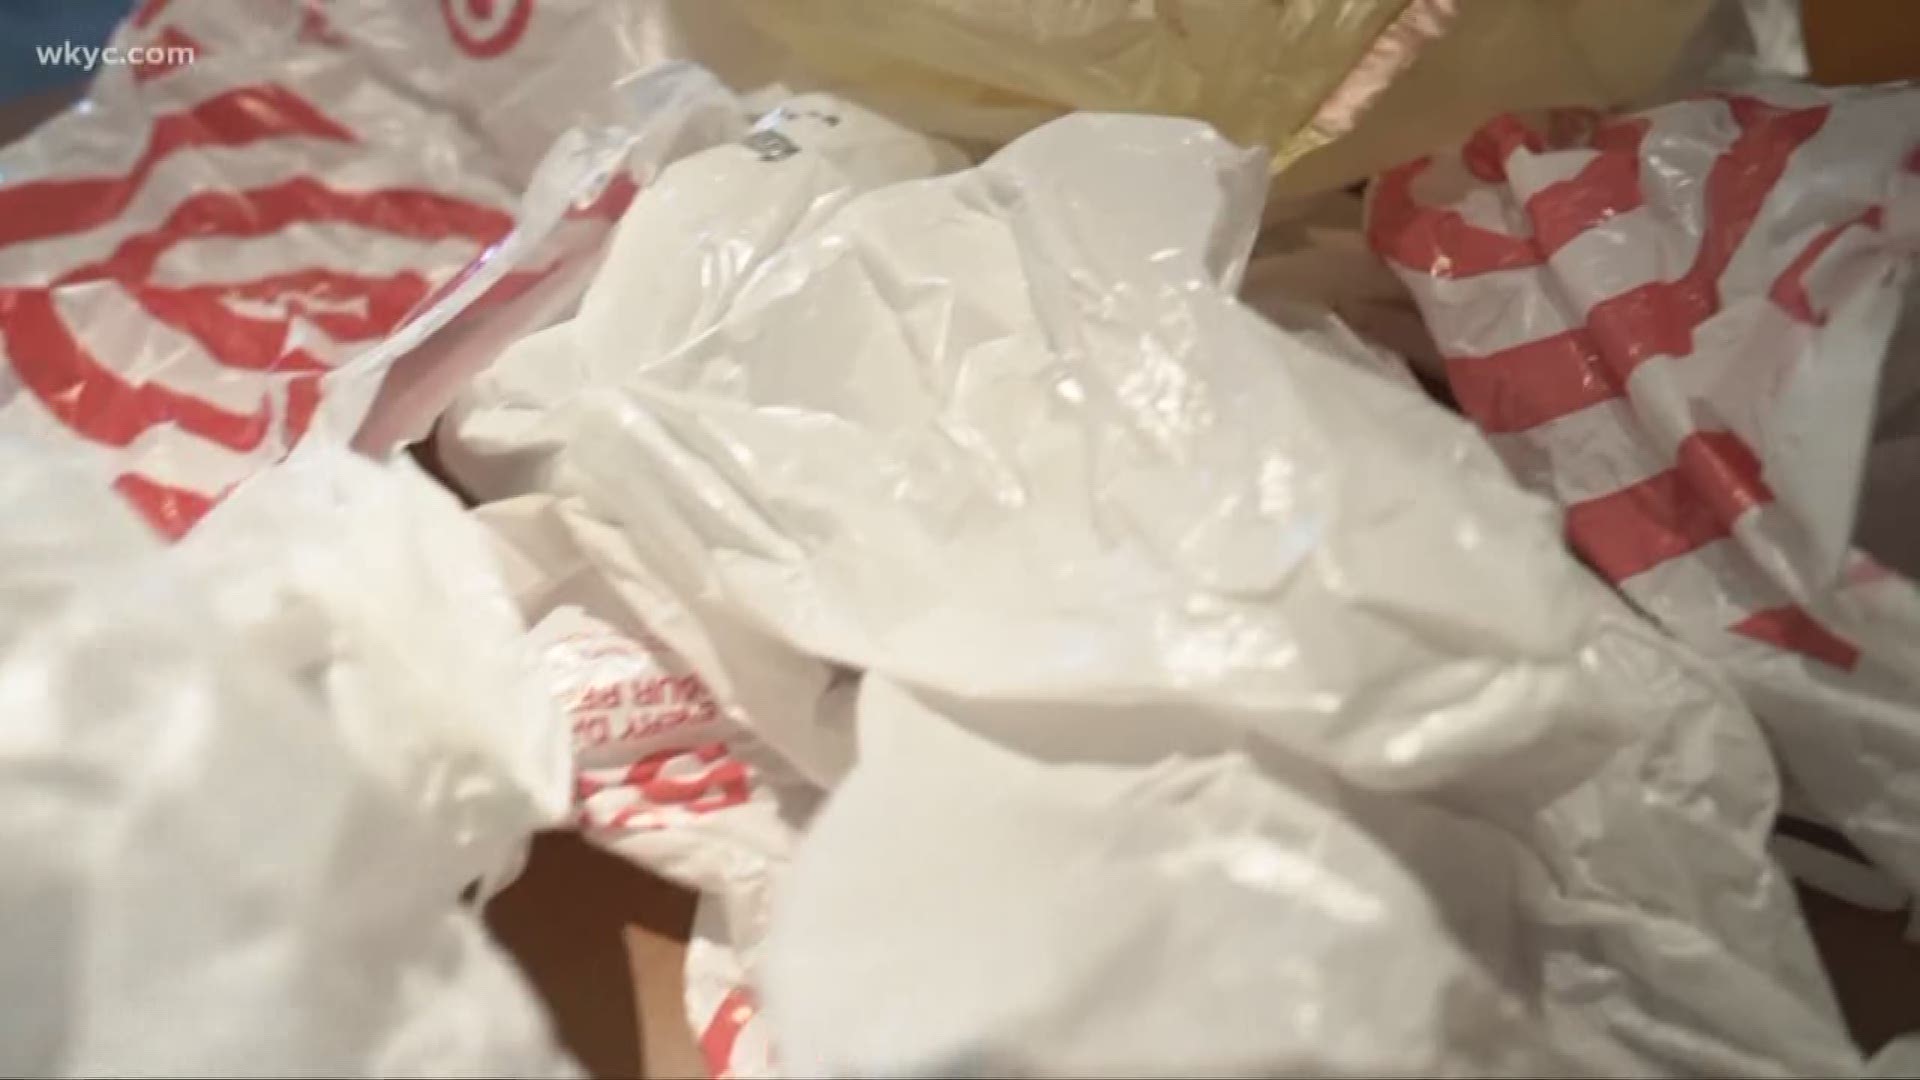 Banning plastic bags: How it could backfire, and how you can help